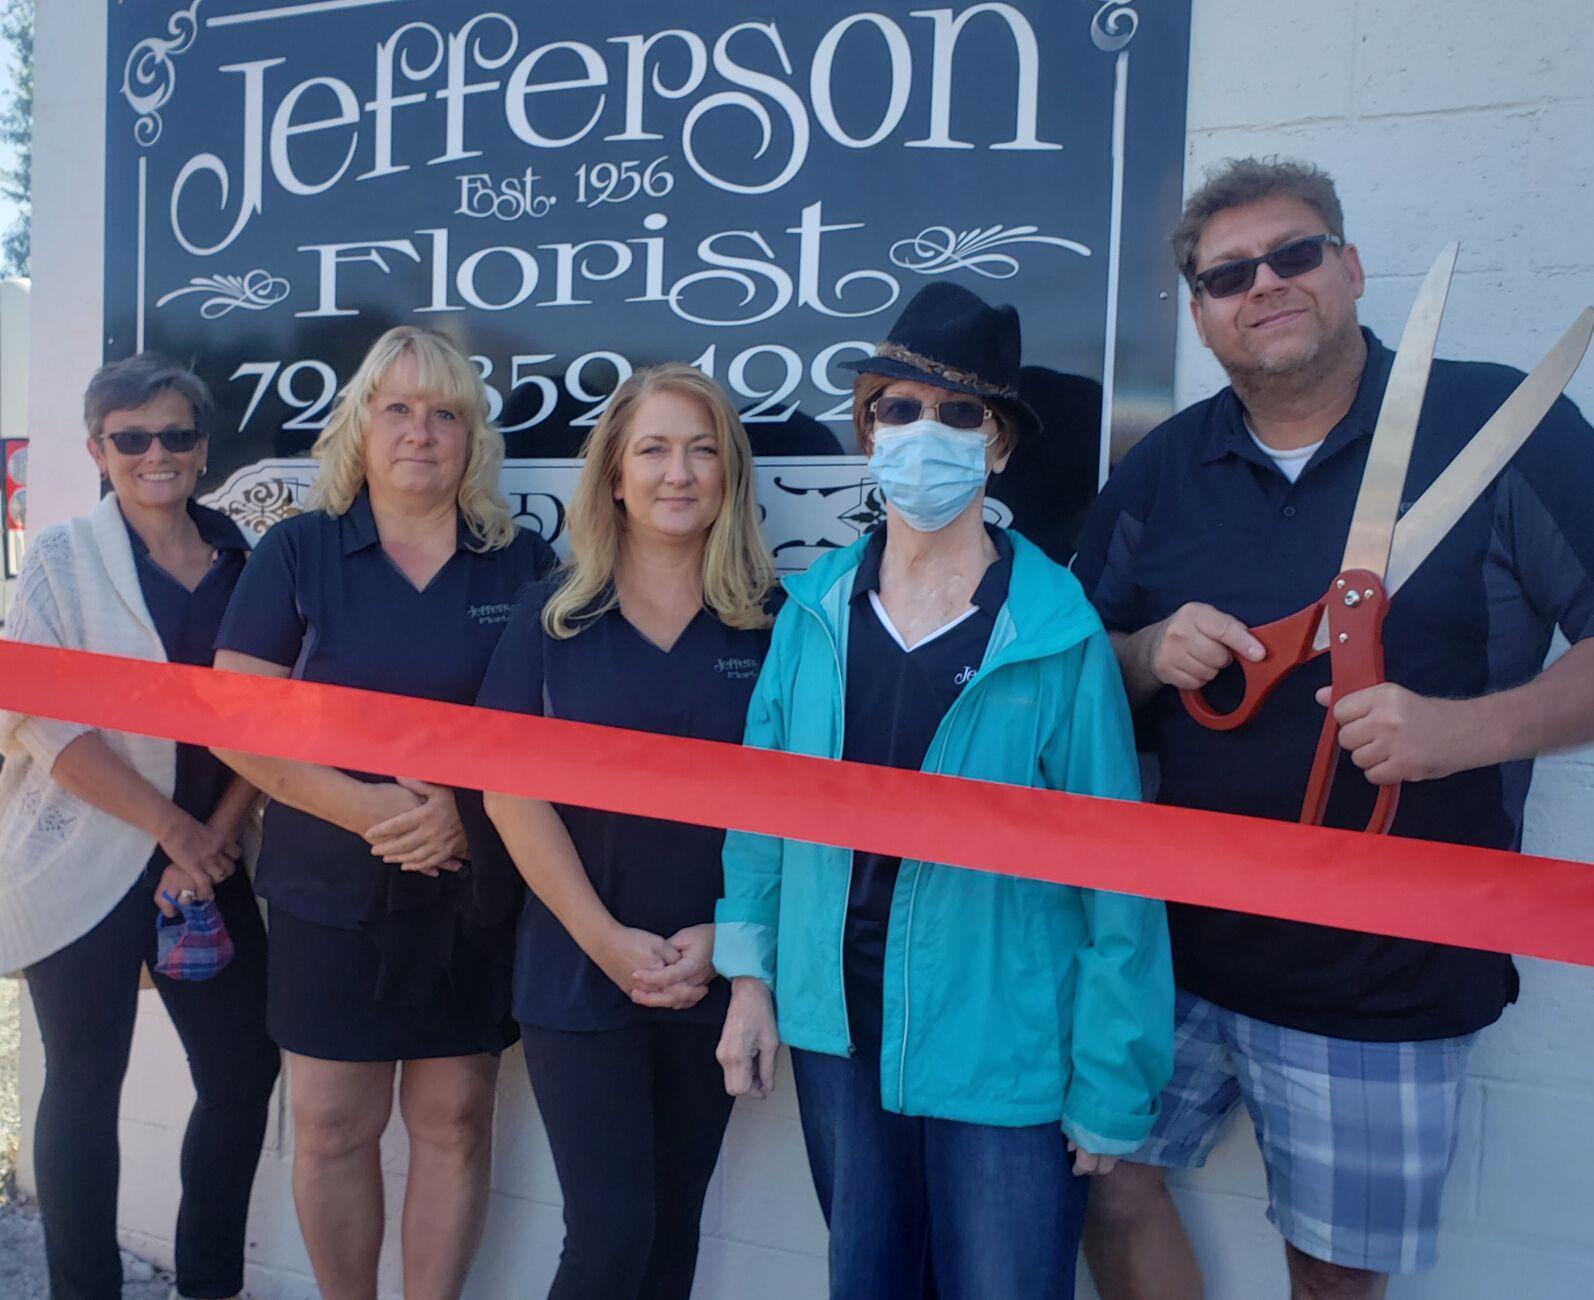 Waynesburg welcomes relocated Jefferson Florist with special ceremony